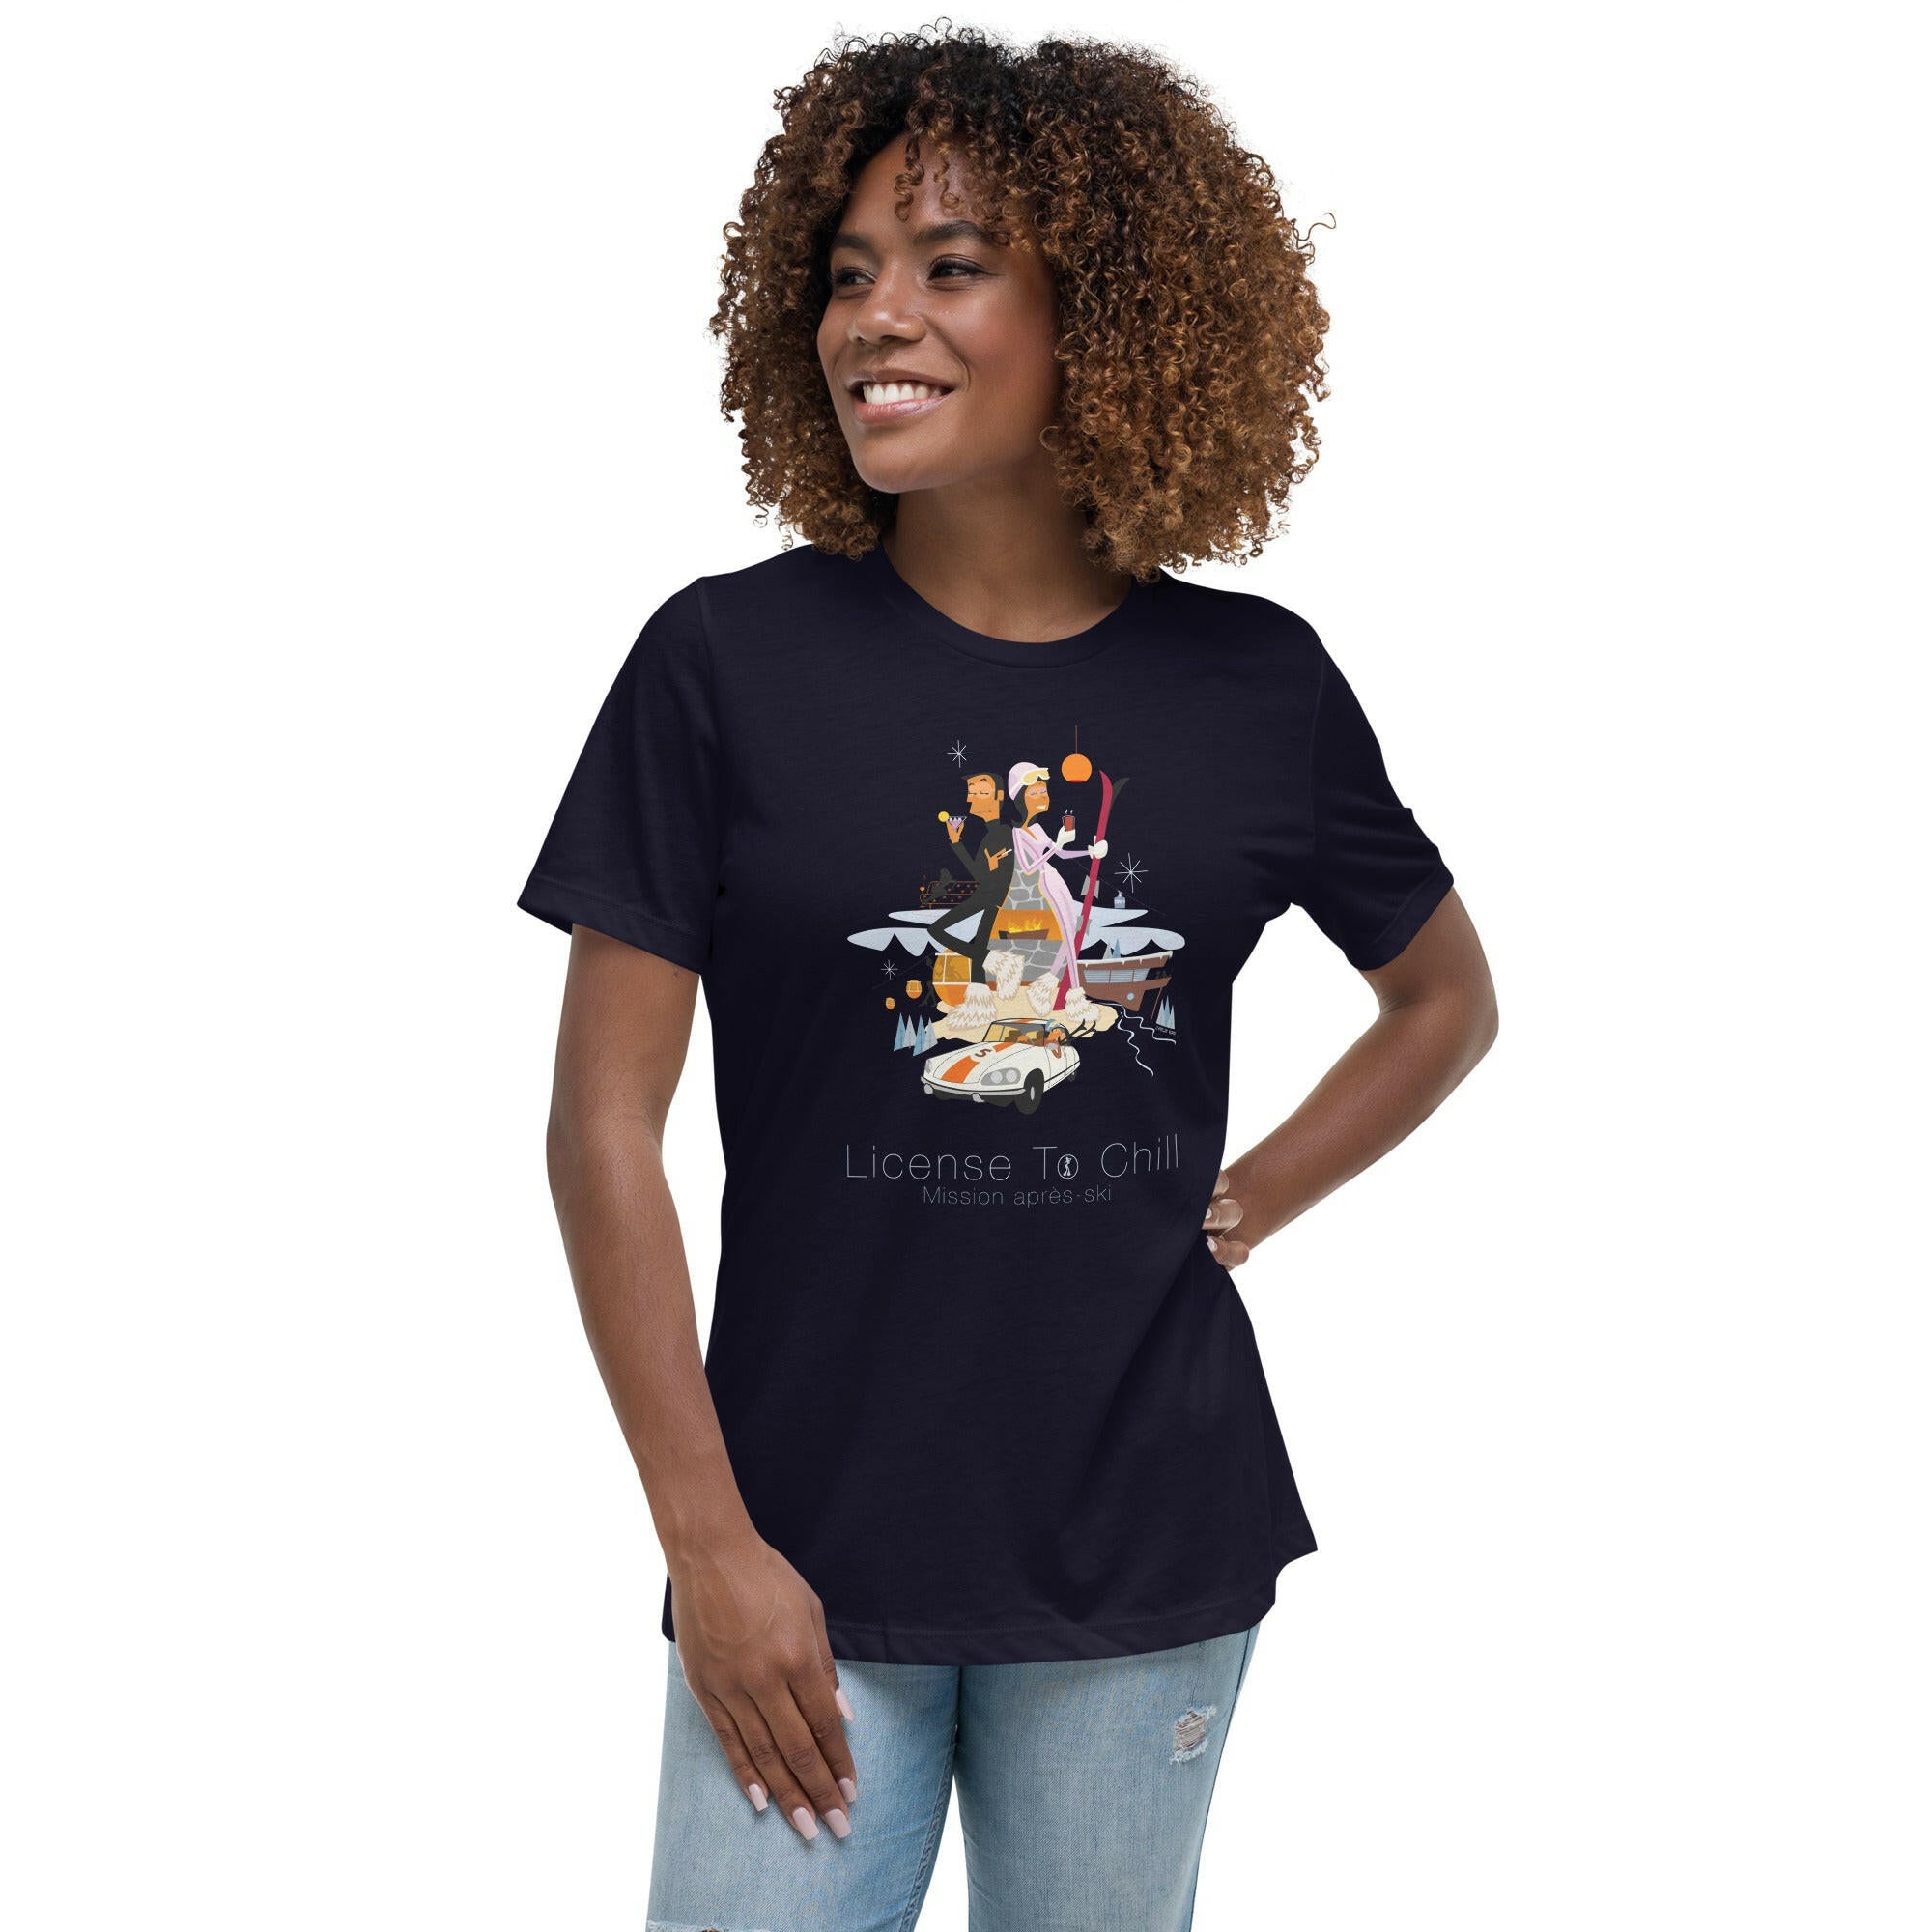 Women's Relaxed T-Shirt License To Chill Mission Après-Ski